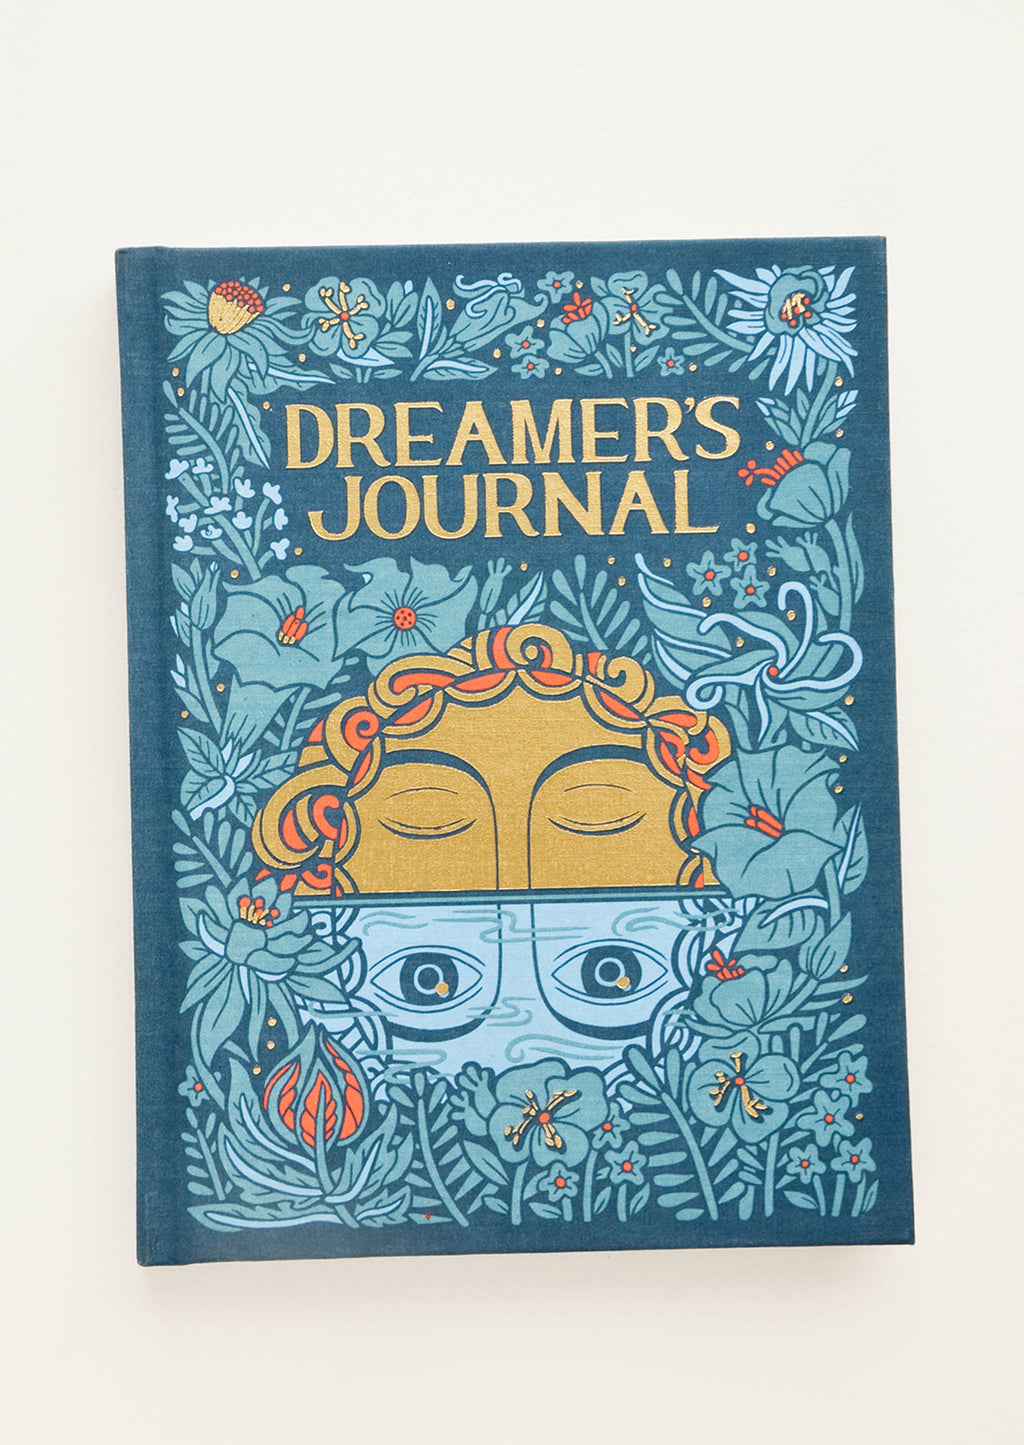 1: Fabric-covered journal with mystical moon and floral print, titled "Dreamer's Journal"